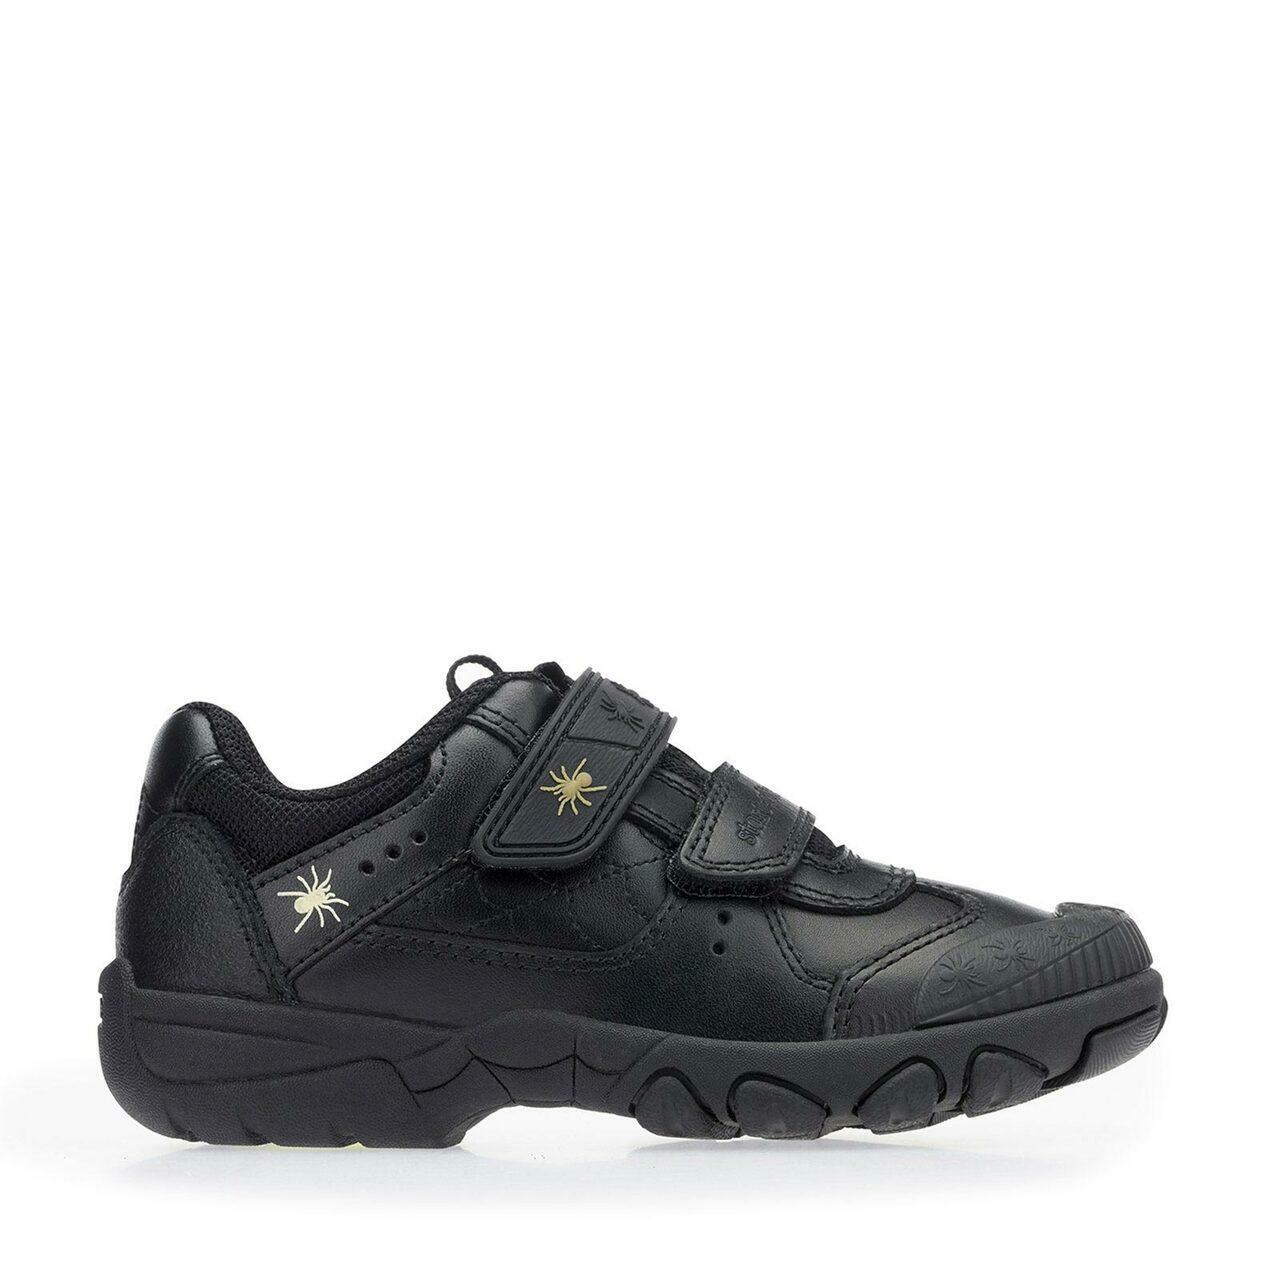 A boys school shoe by Start Rite,style Tarantula, in black leather with double velcro fastening. Right side  view.